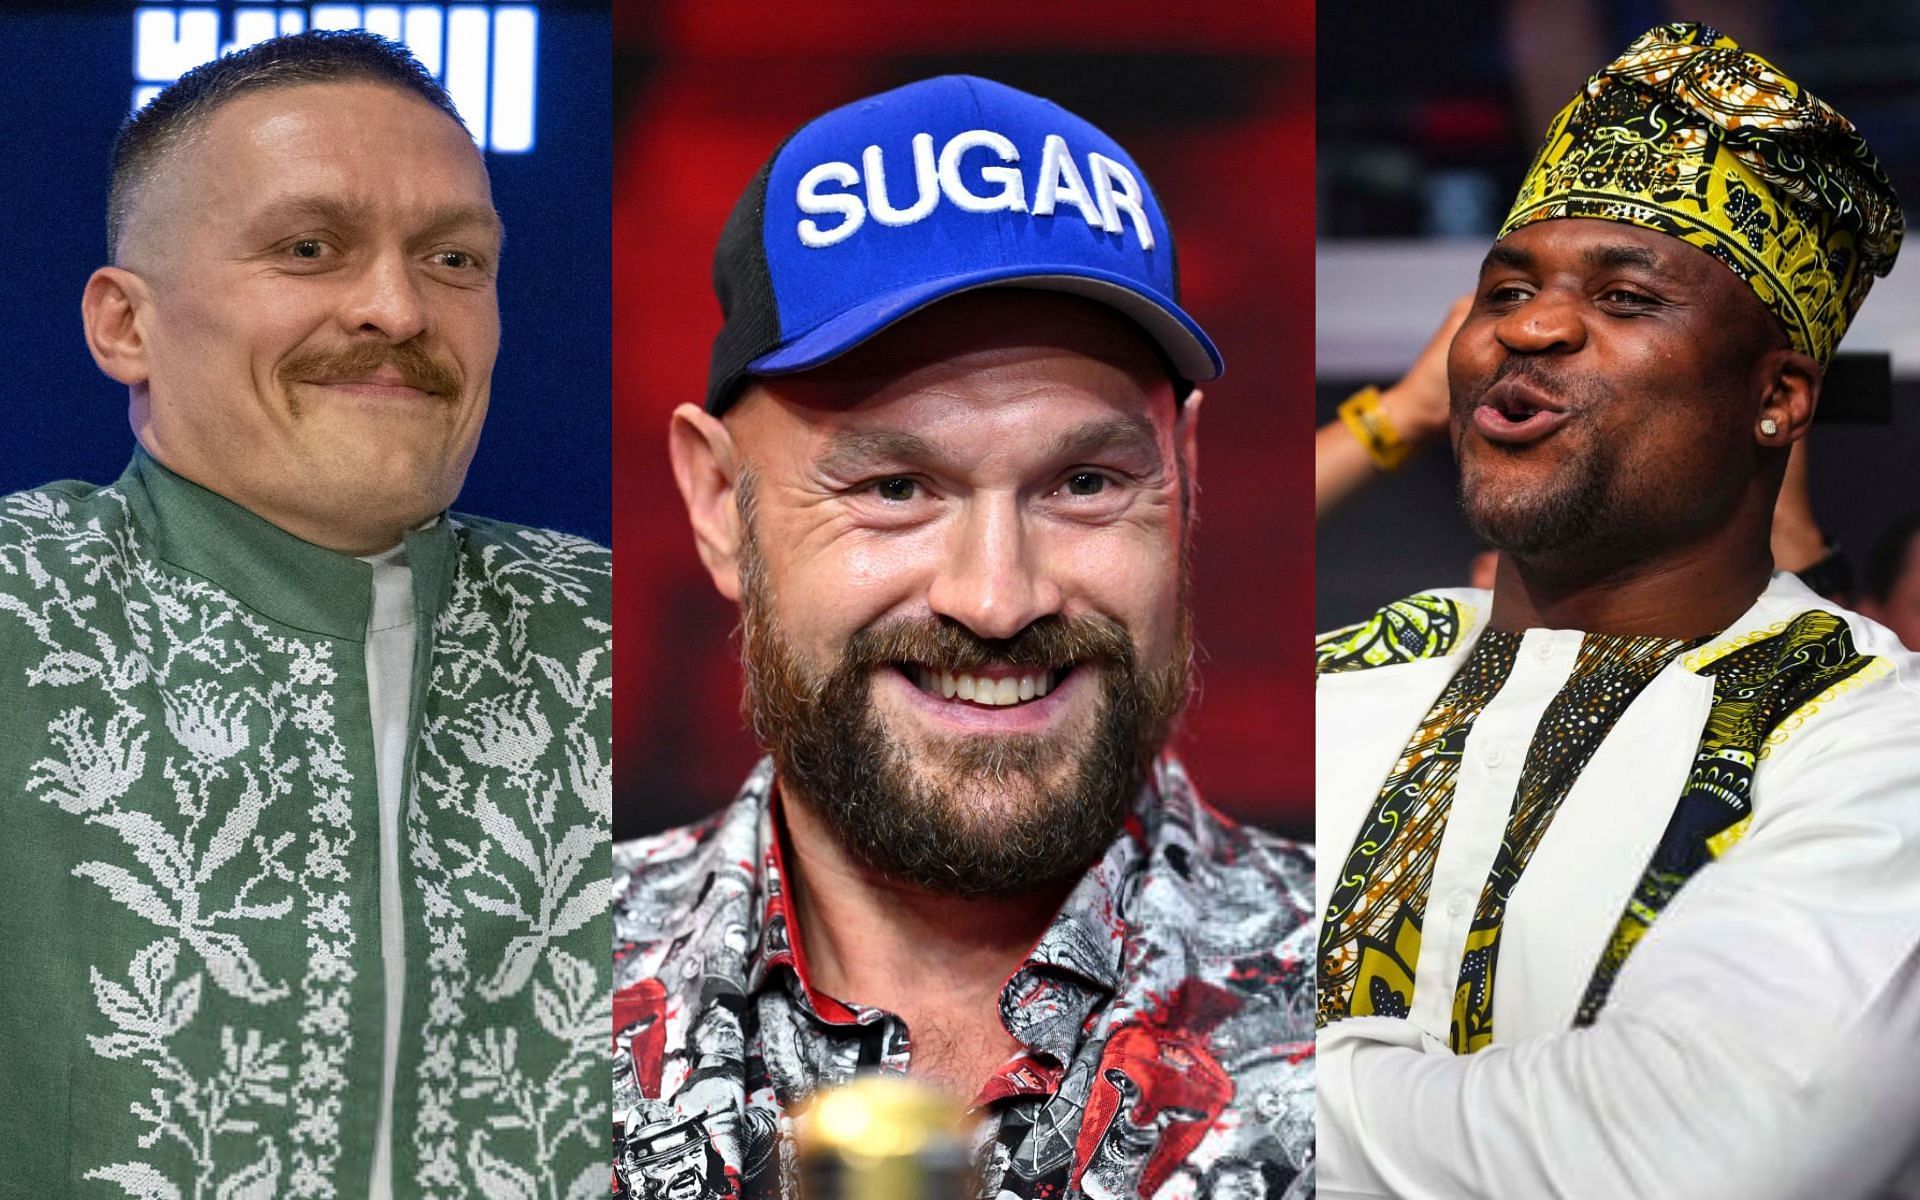 Oleksandr Usyk (left), Tyson Fury (middle) and Francis Ngannou (right) [Images Courtesy: @GettyImages]